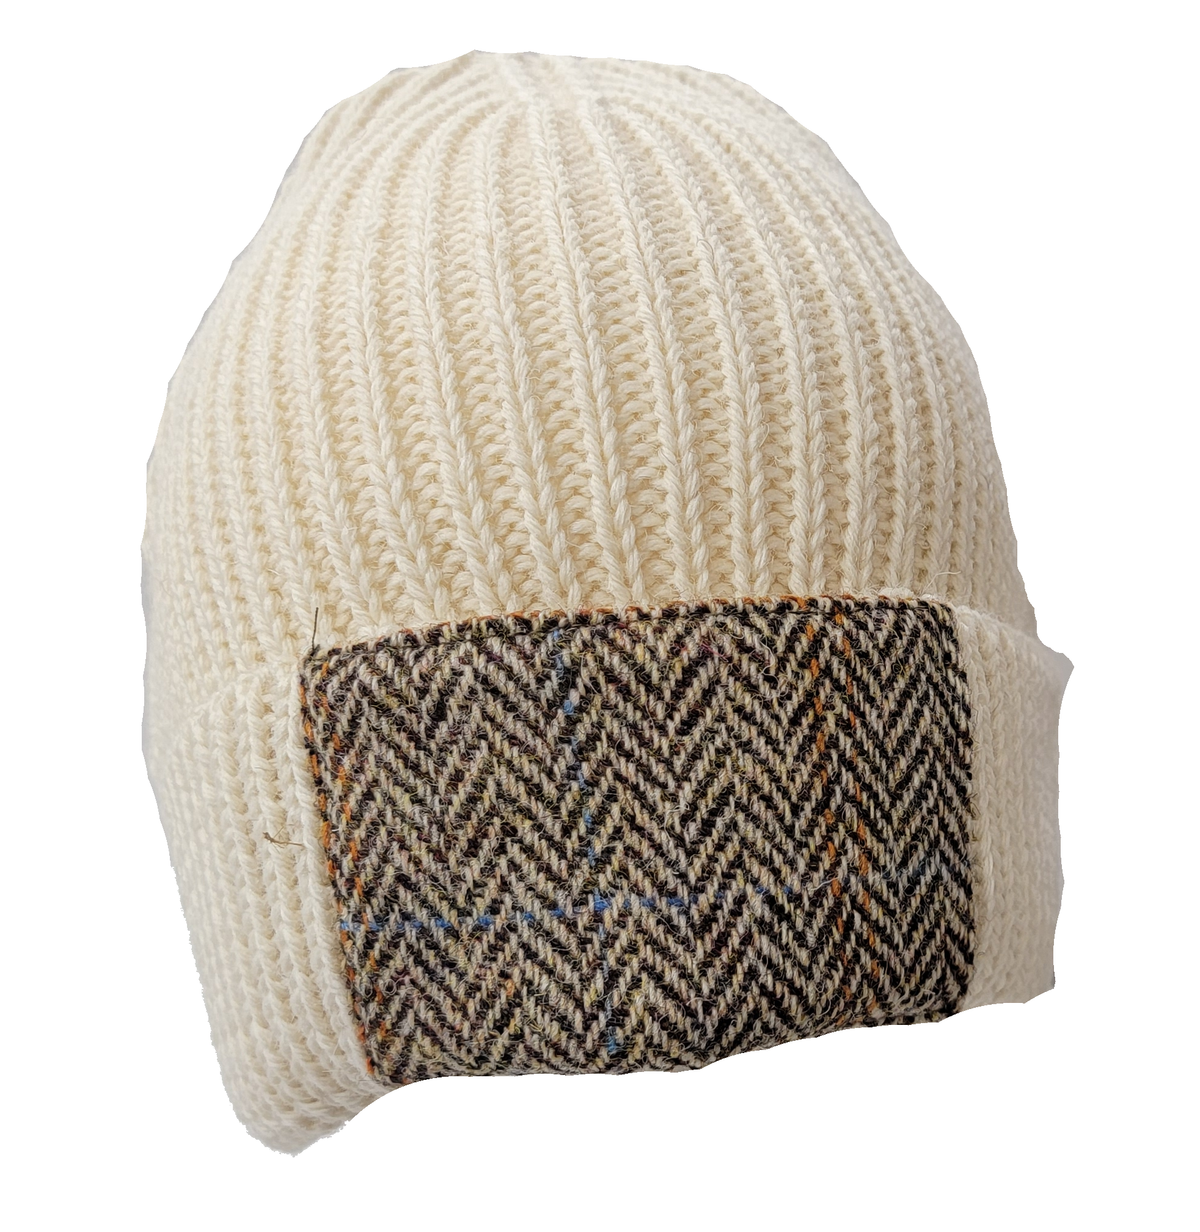 Woolly Pully Beanie Hats with Patch